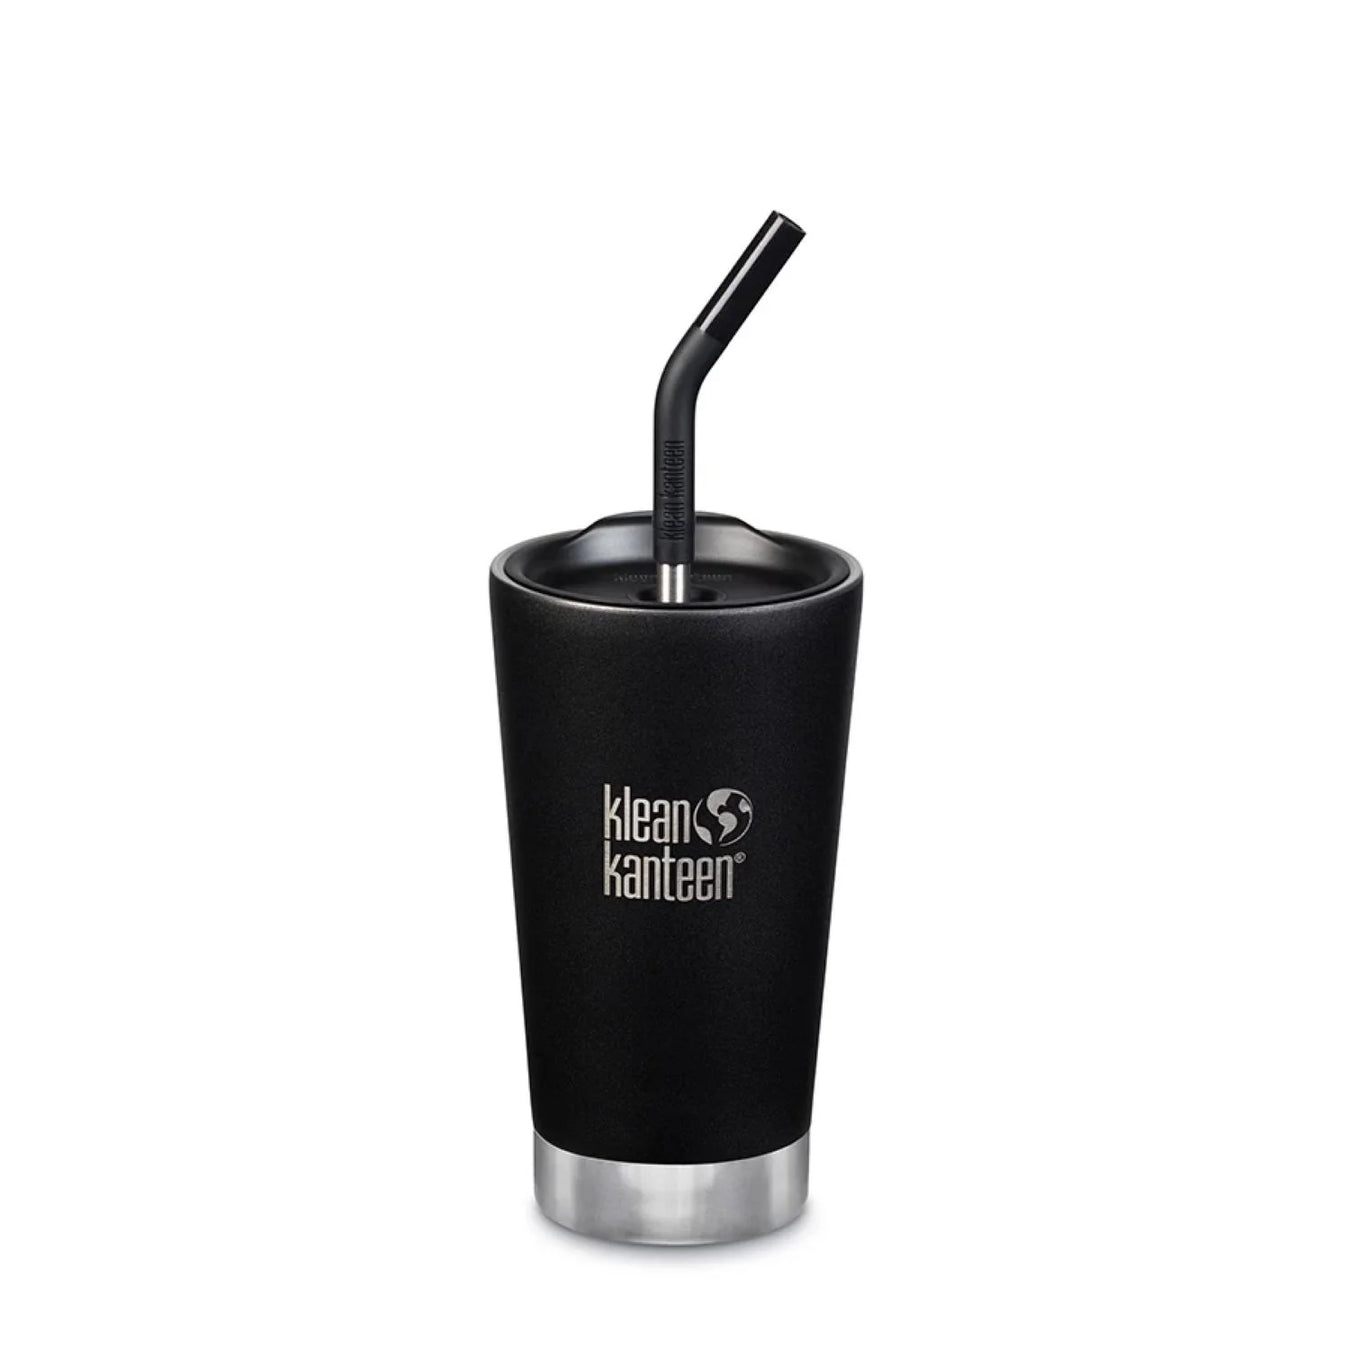 Klean Kanteen's Insulated Tumblers